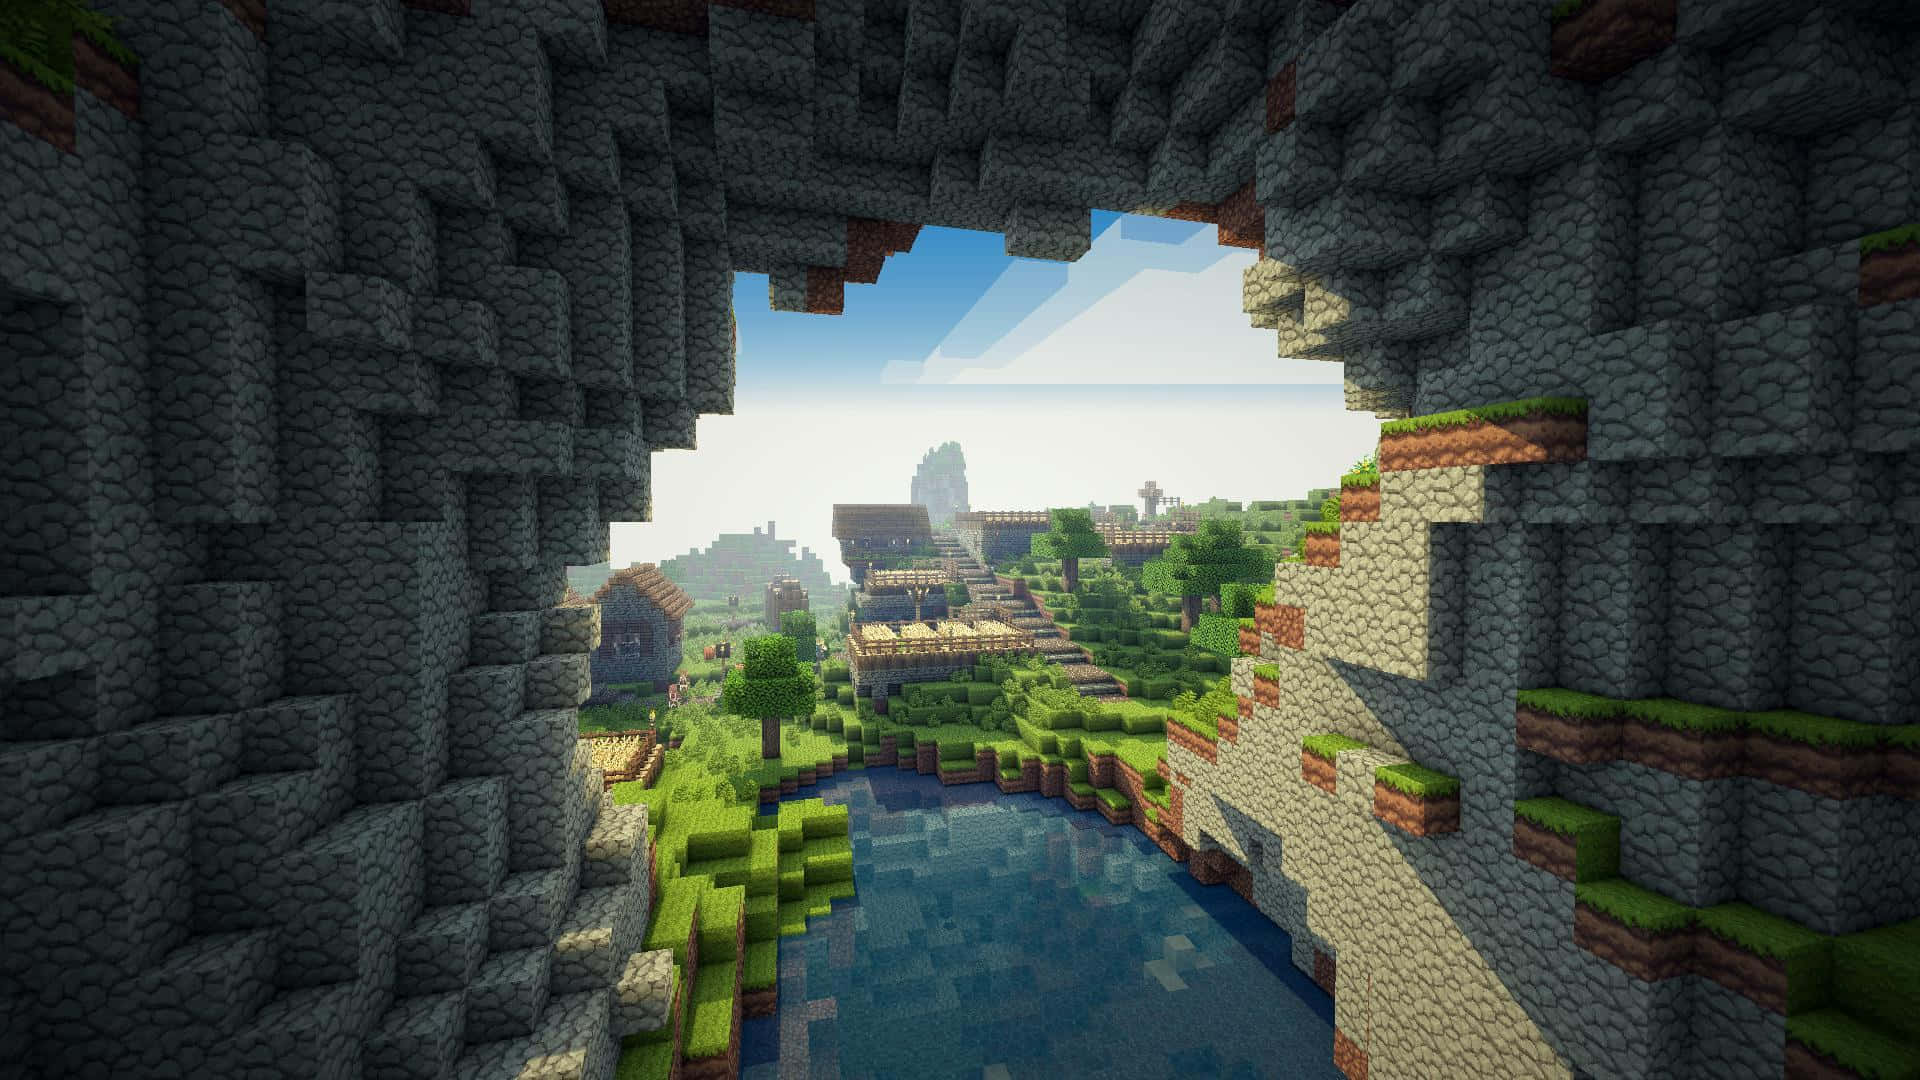 Explore an Endless World of Possibilities in Cool Minecraft